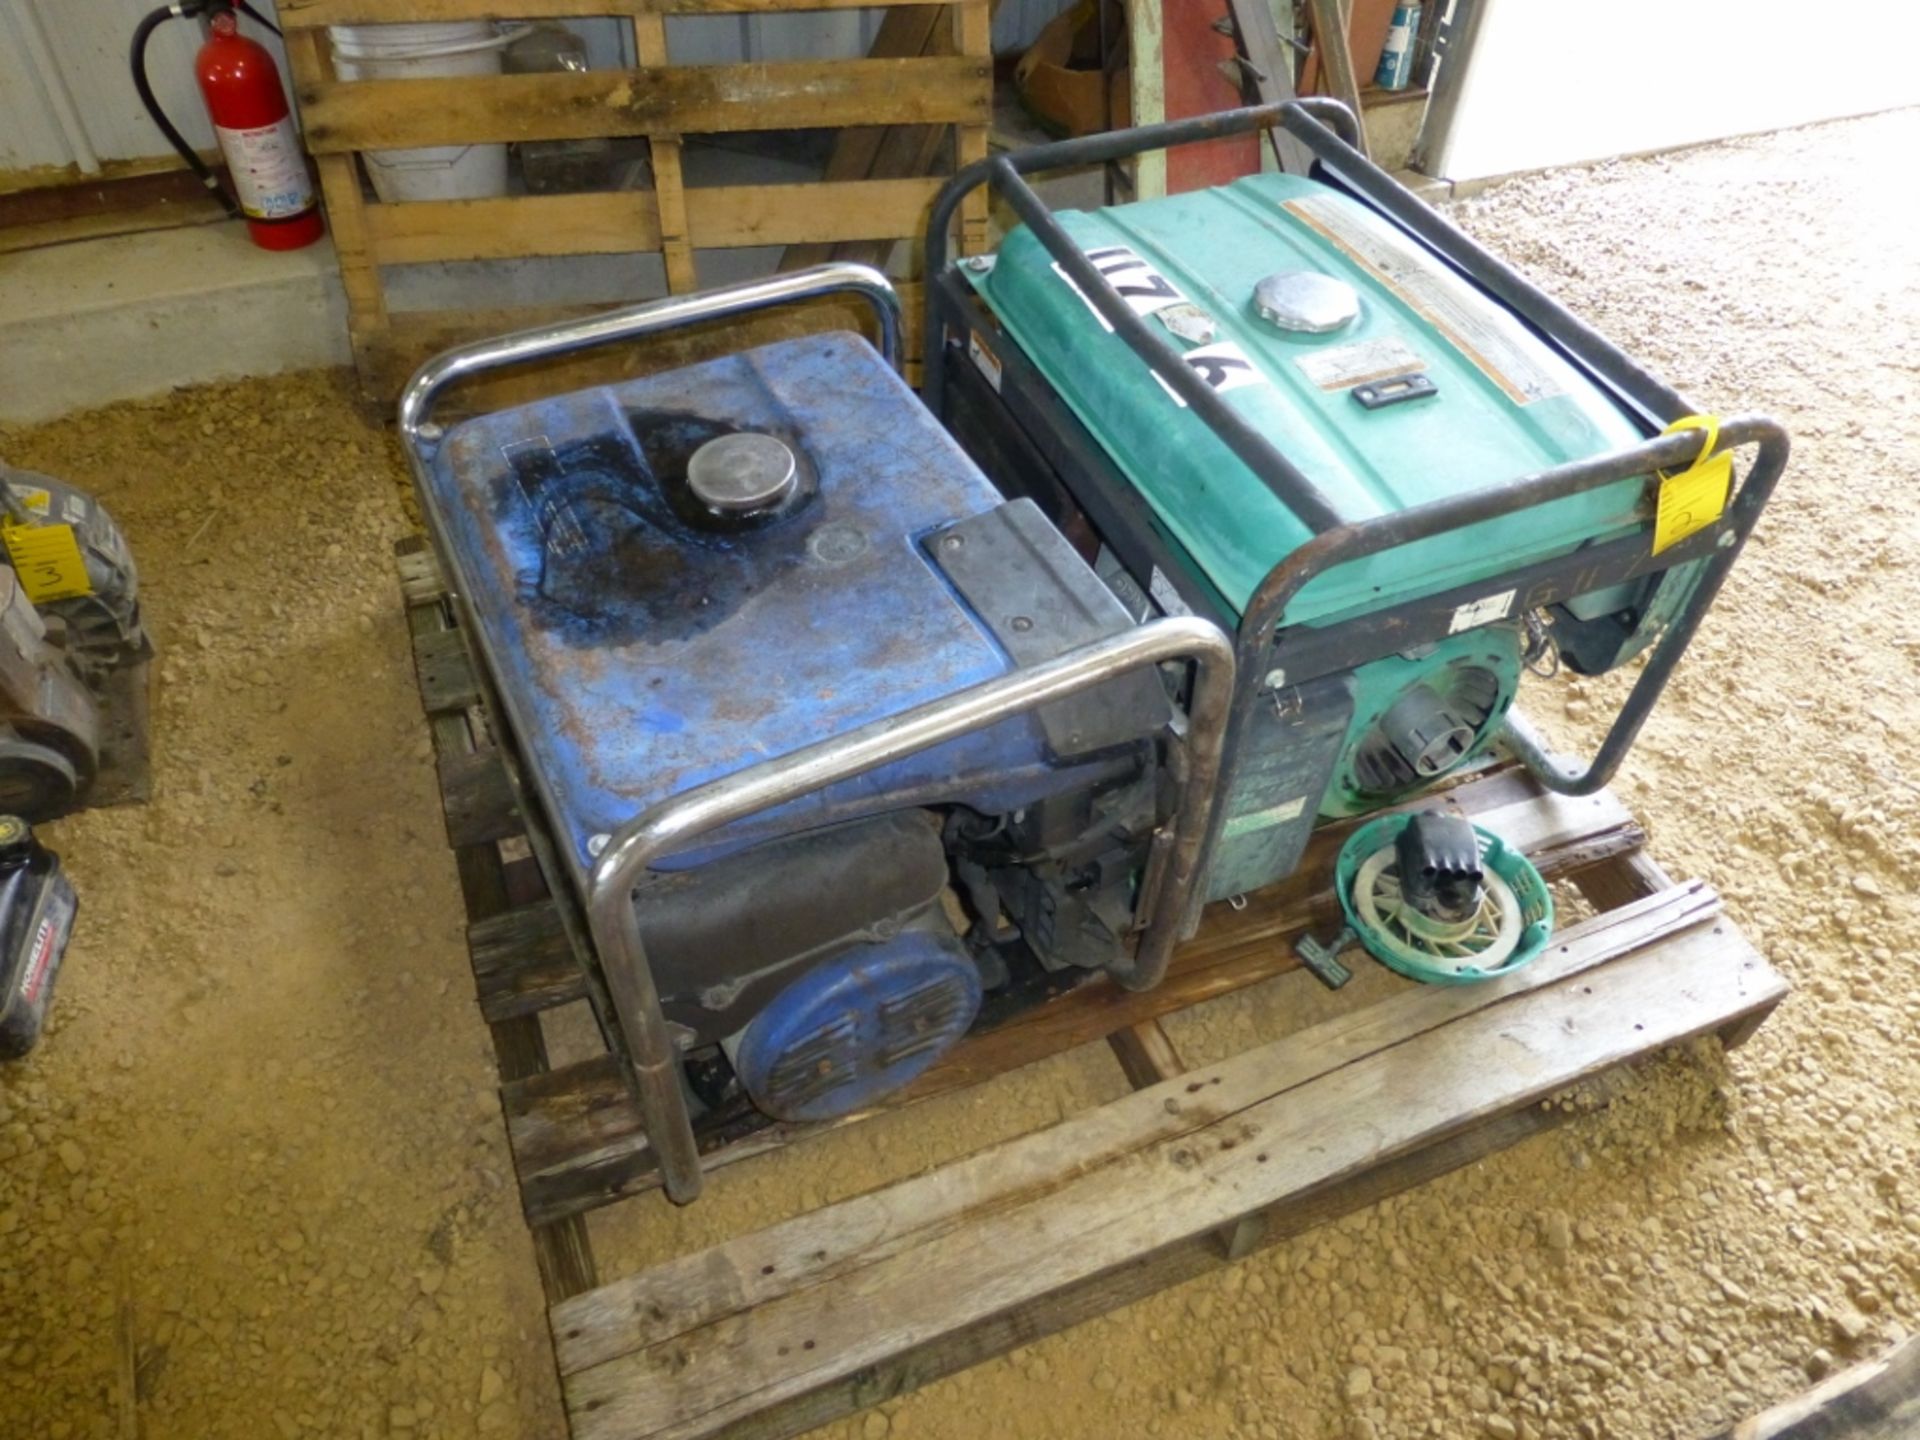 Homesite power 6500 generator, missing recoil, with blue generator, unknown working condition